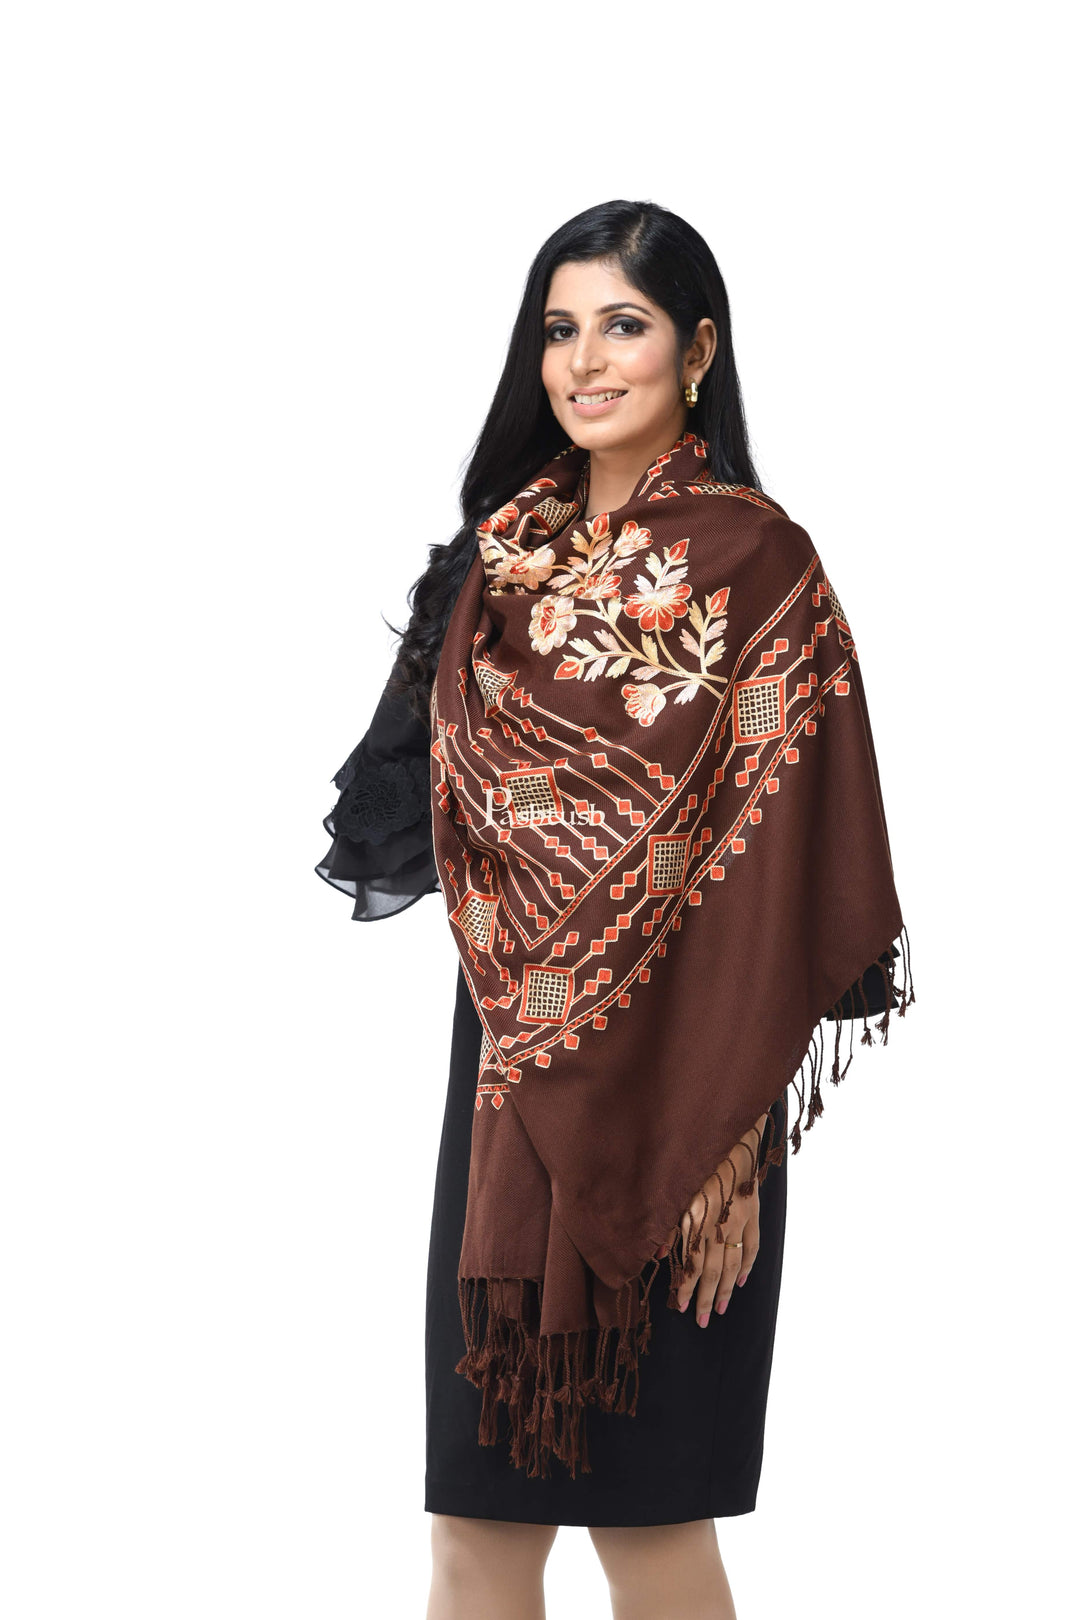 Pashwool Womens Stoles and Scarves Scarf Pashwool Womens Kashmiri Embroidery Stole, Soft And Warm, Woollen Stole Coffee